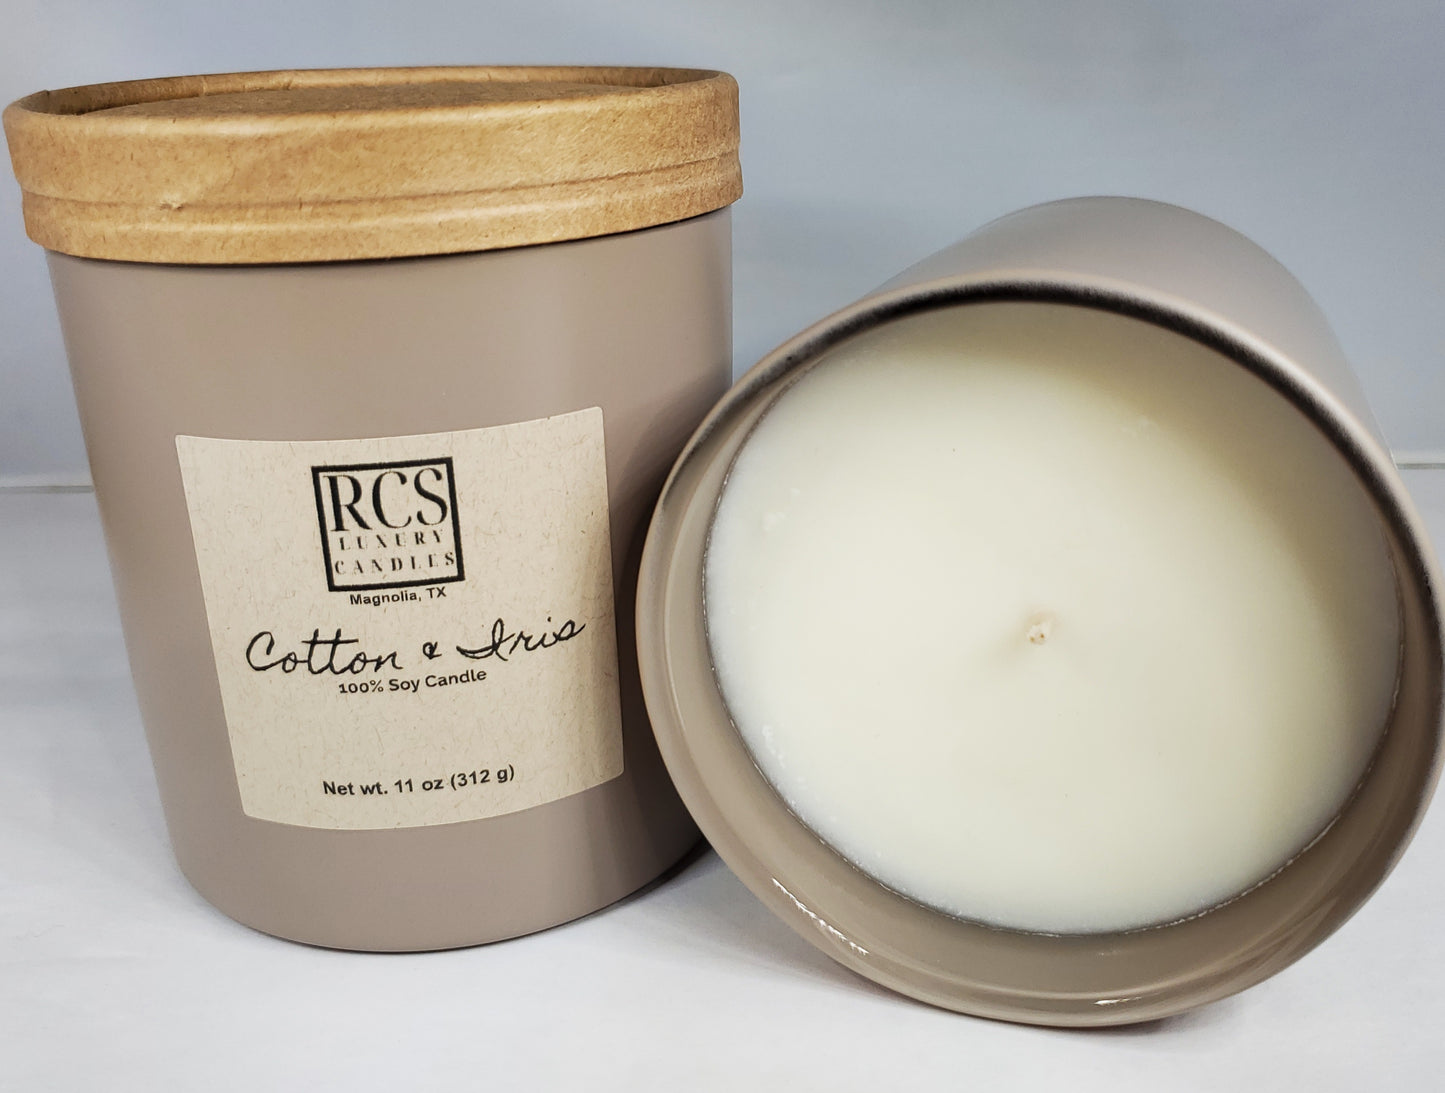 Cotton & Iris Soy Candle